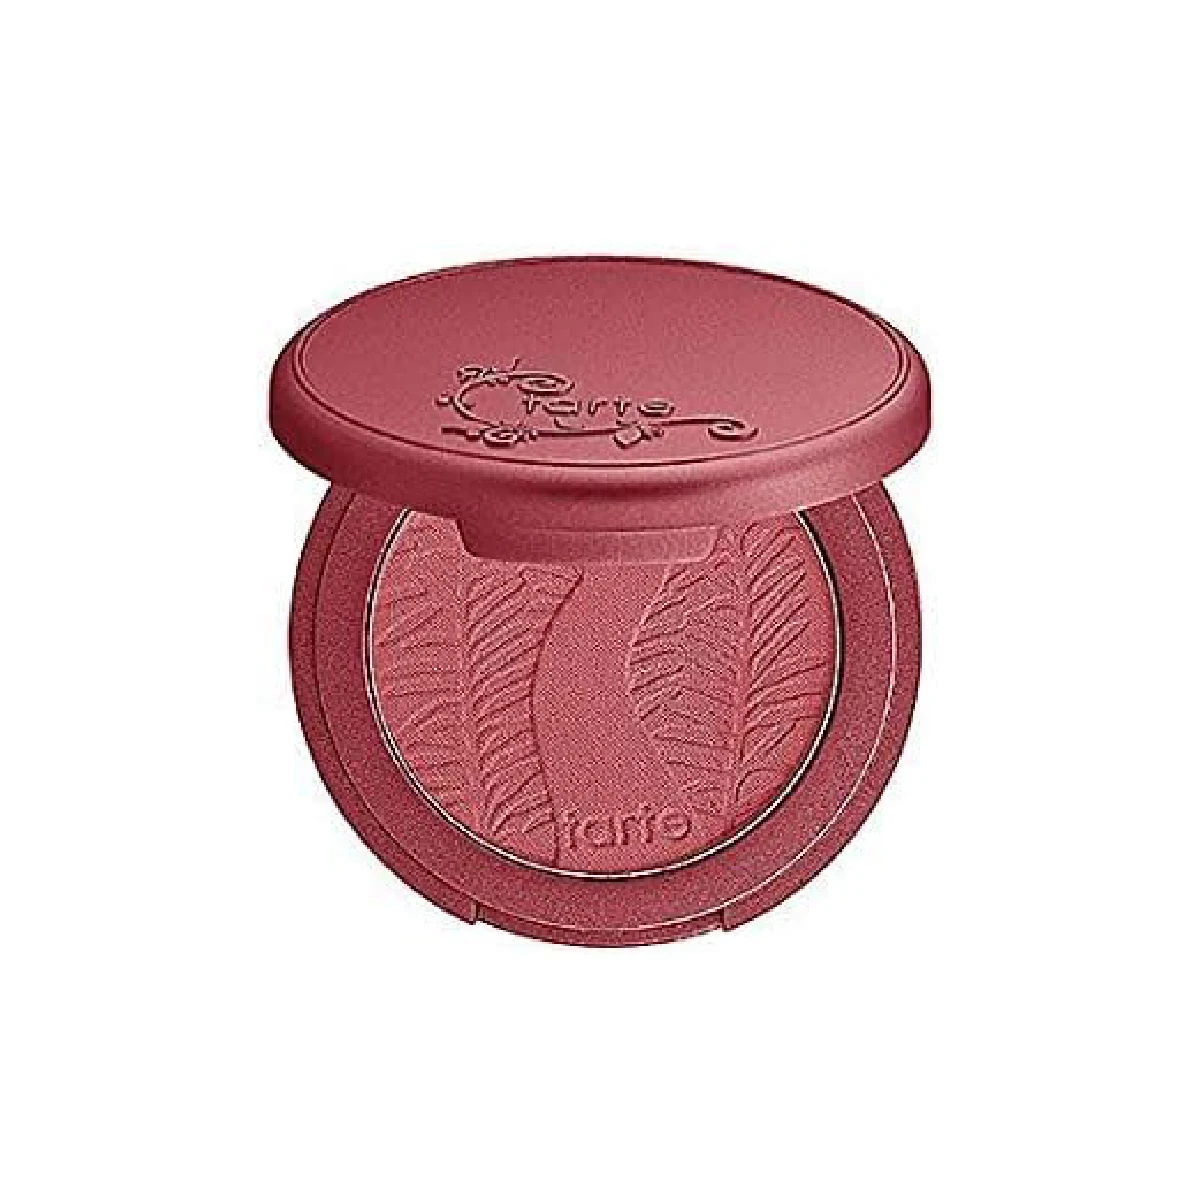 Tarte Amazonian Clay 12-Hour Foundation - a foundation bottle against a white background